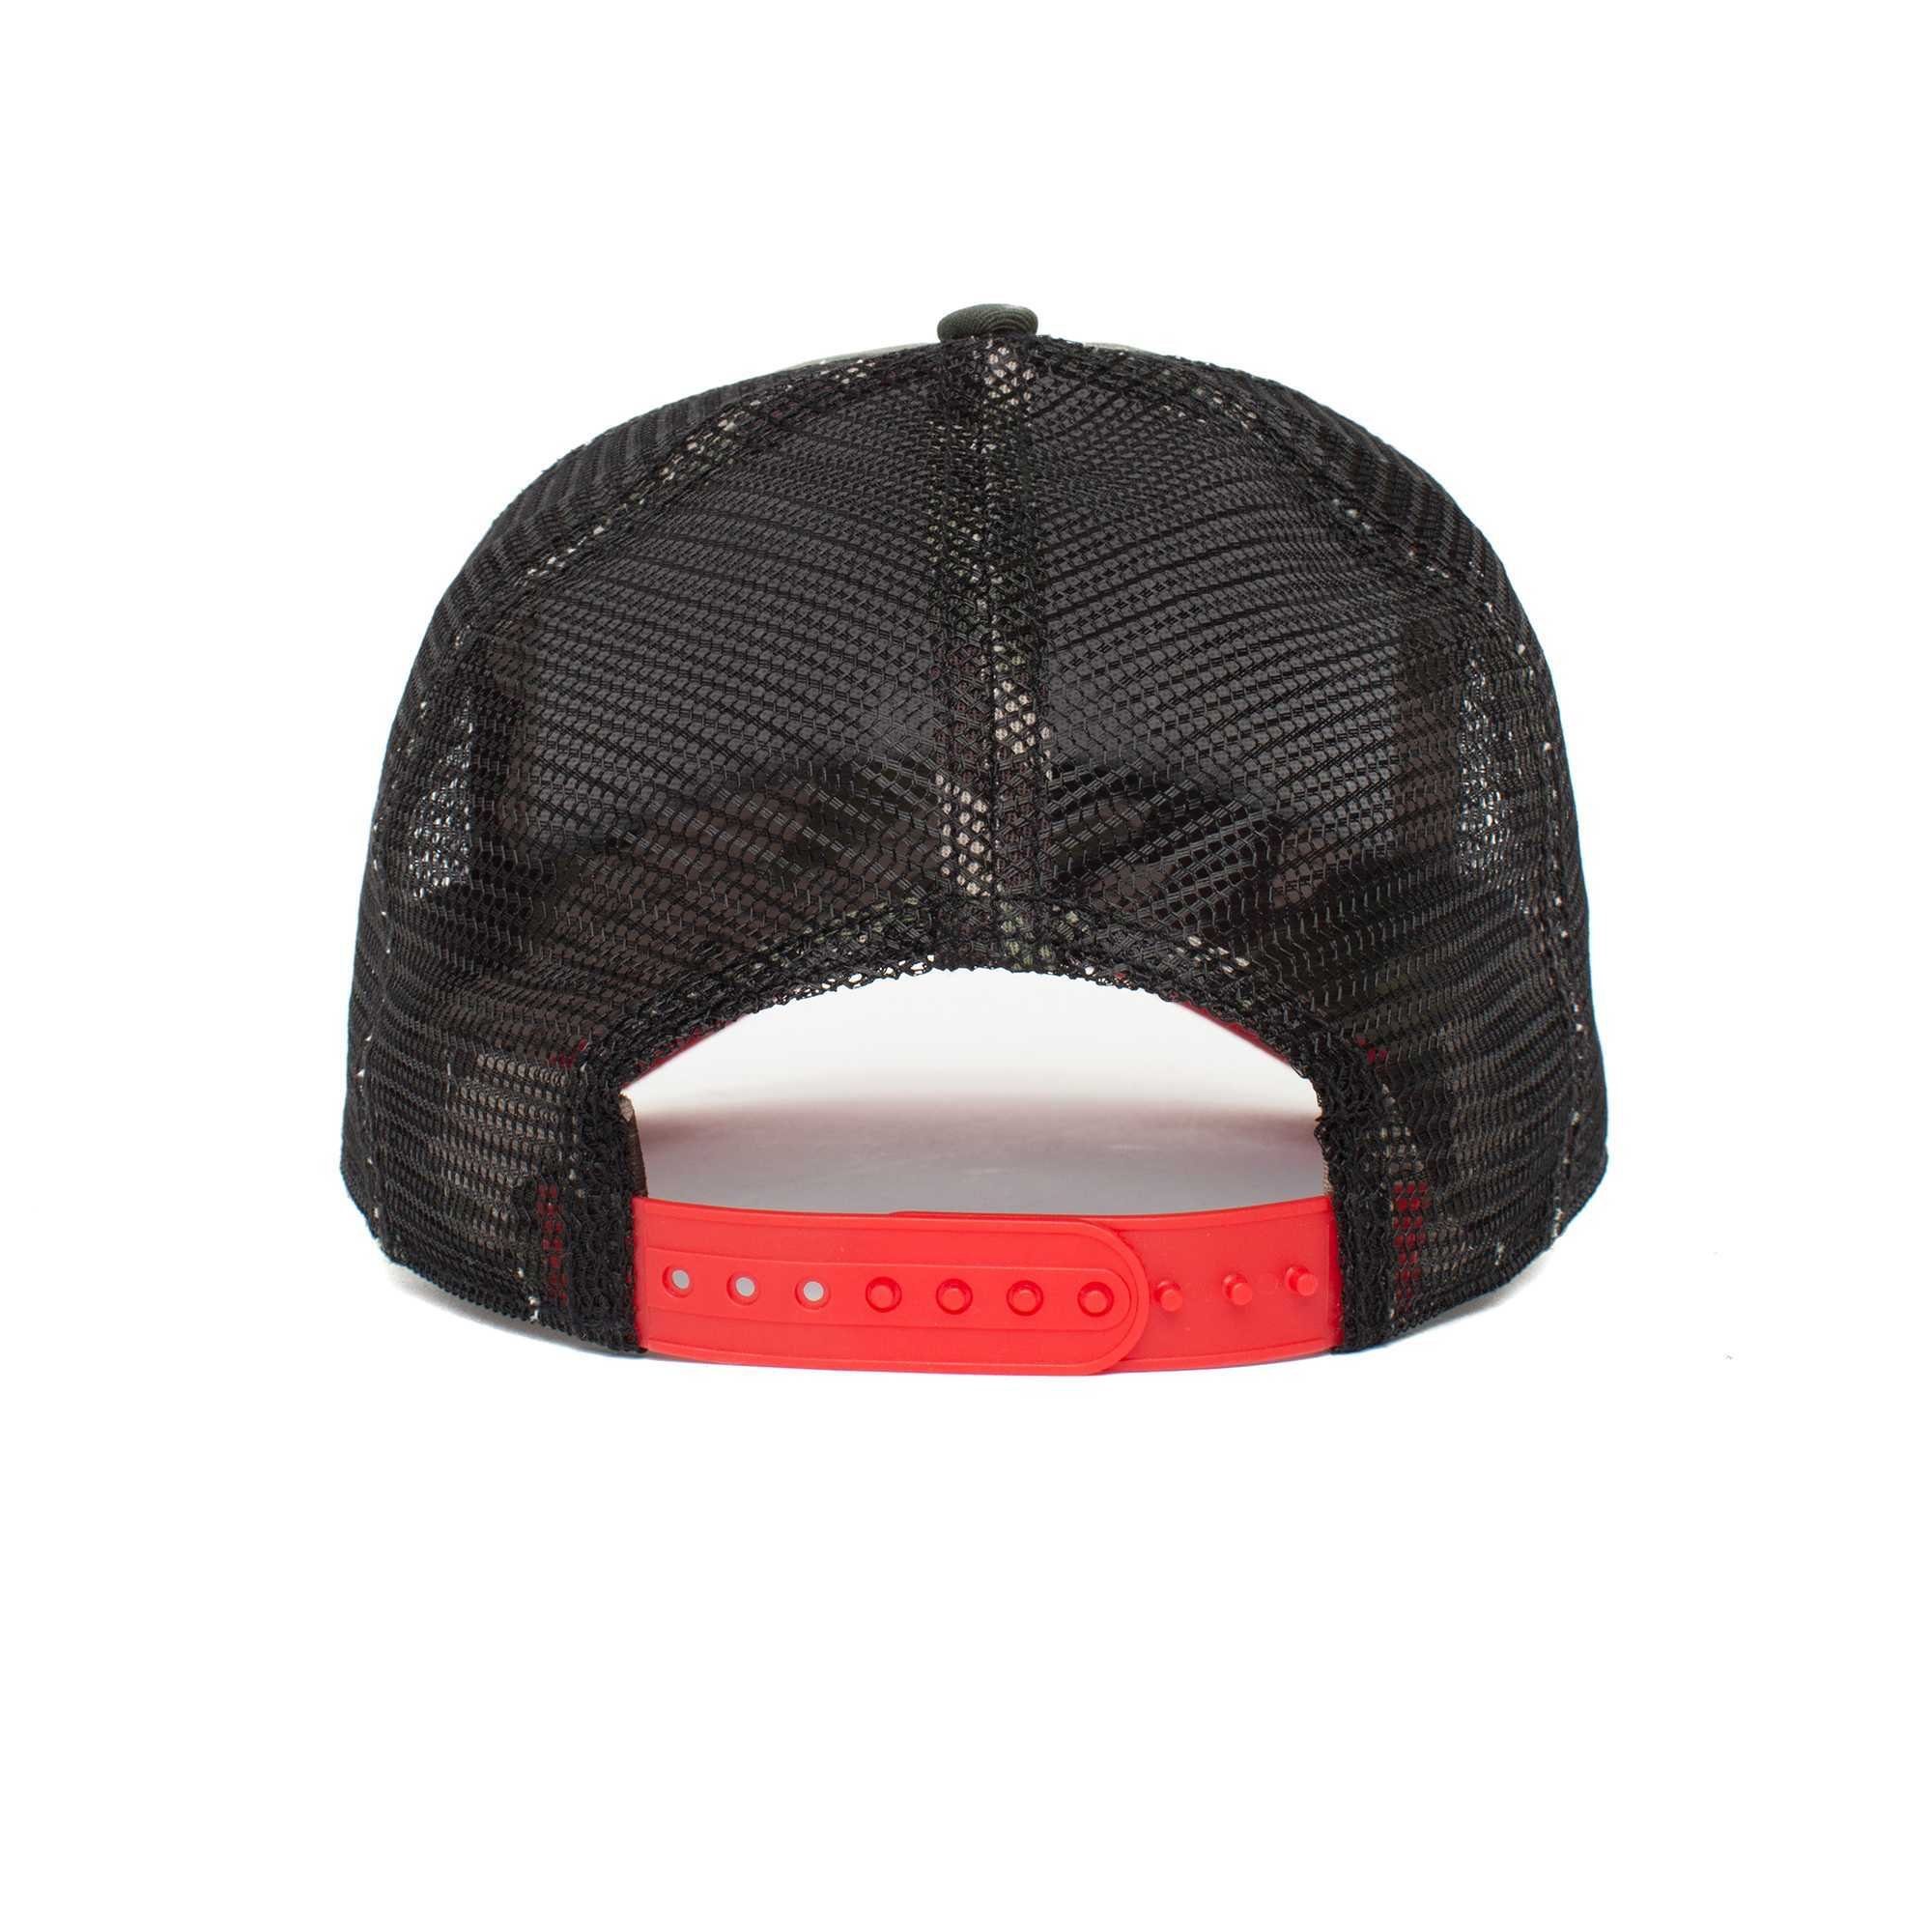 The Cap Unisex Baseball Trucker Kappe, Rooster Size Bros. One GOORIN Frontpatch, - Cap